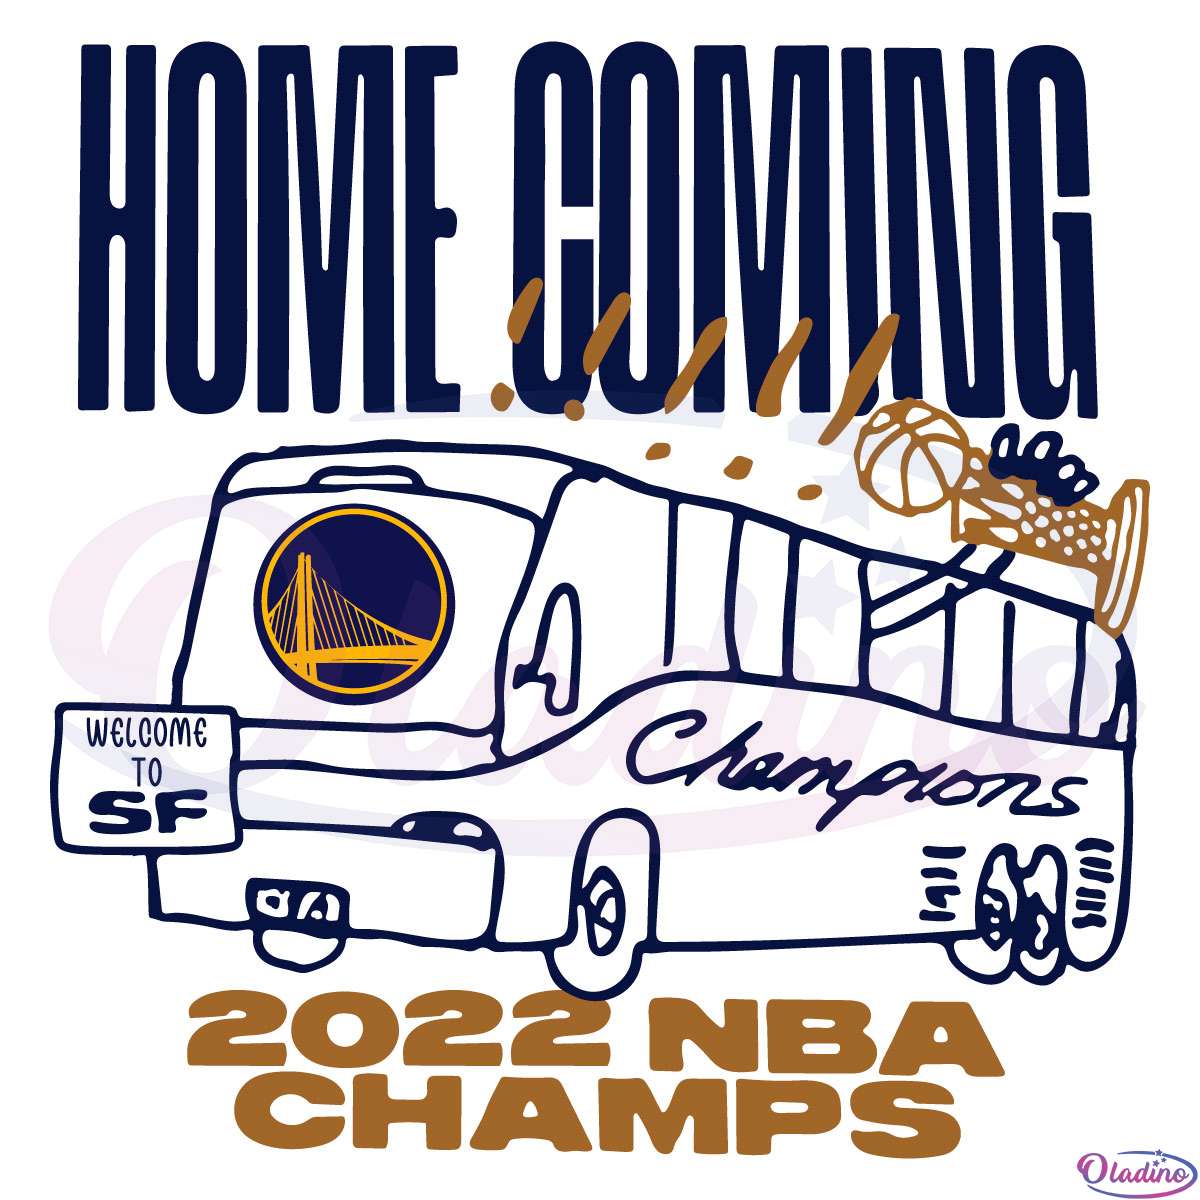 Home Coming 2022 NBA Champs Golden State Warriors 2022 Svg